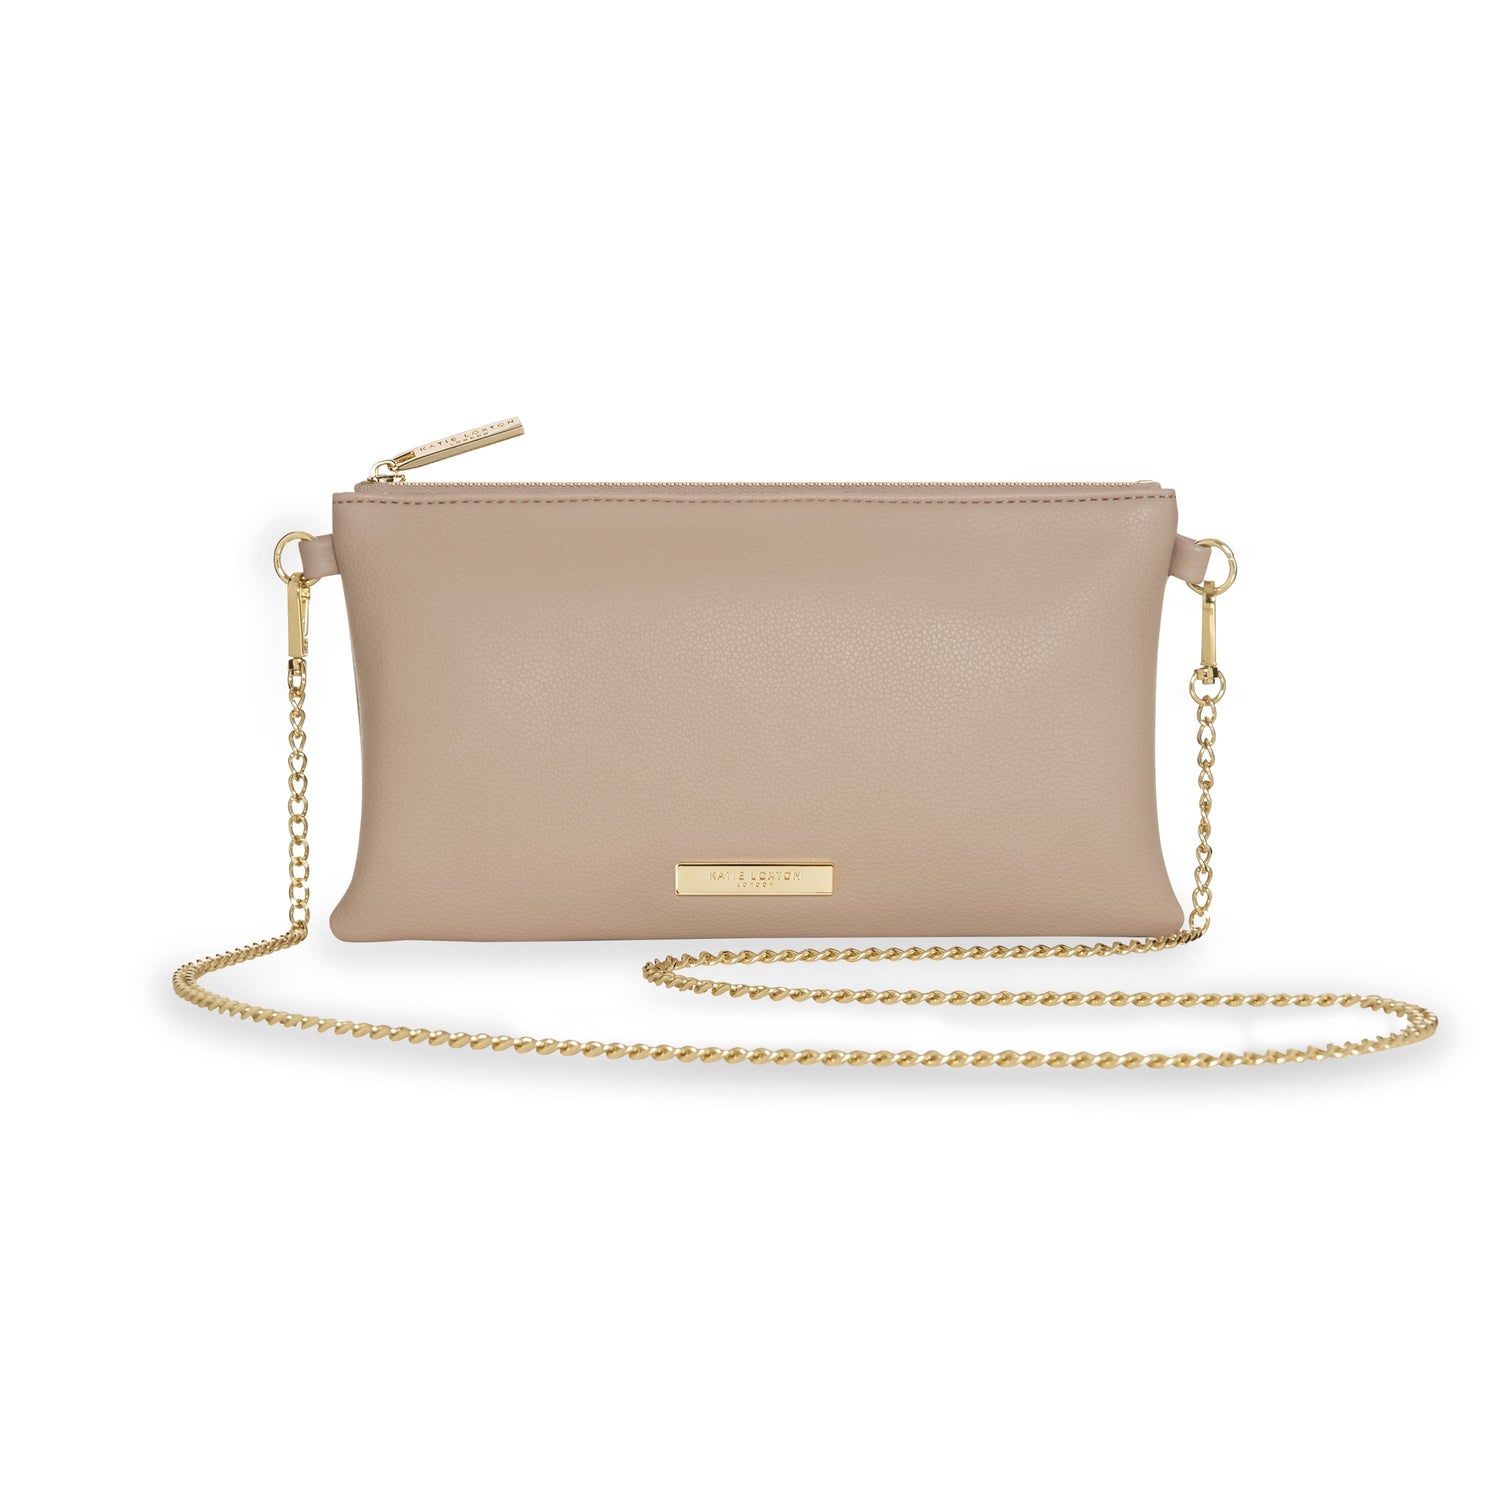 Katie Loxton Accessories One Size Katie Loxton Freya Taupe Cross Body Bag With Chain Strap KLB862 izzi-of-baslow